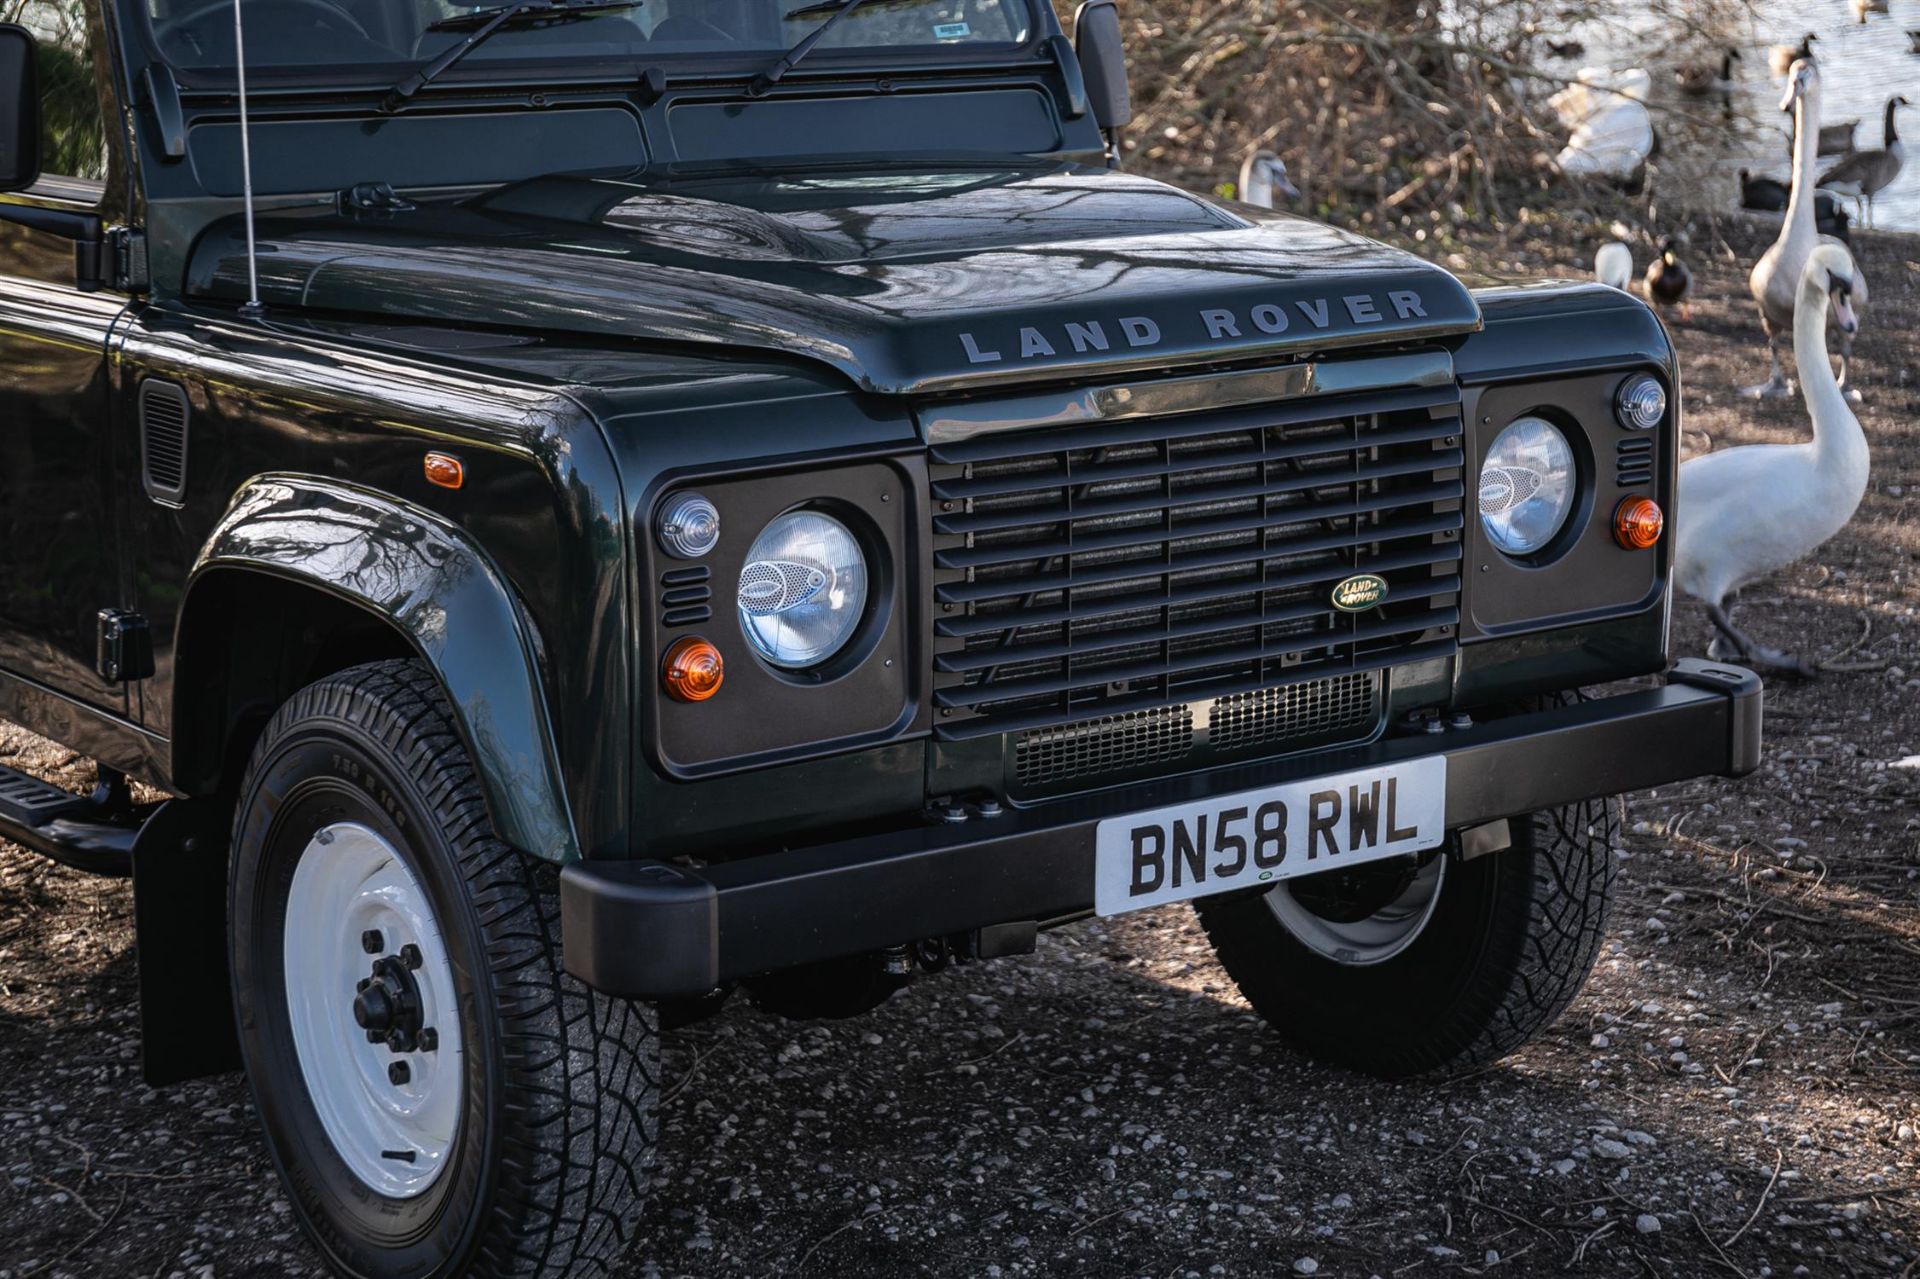 2008 Land Rover Defender 90 TDCi 2.4 County Station Wagon - Image 7 of 10